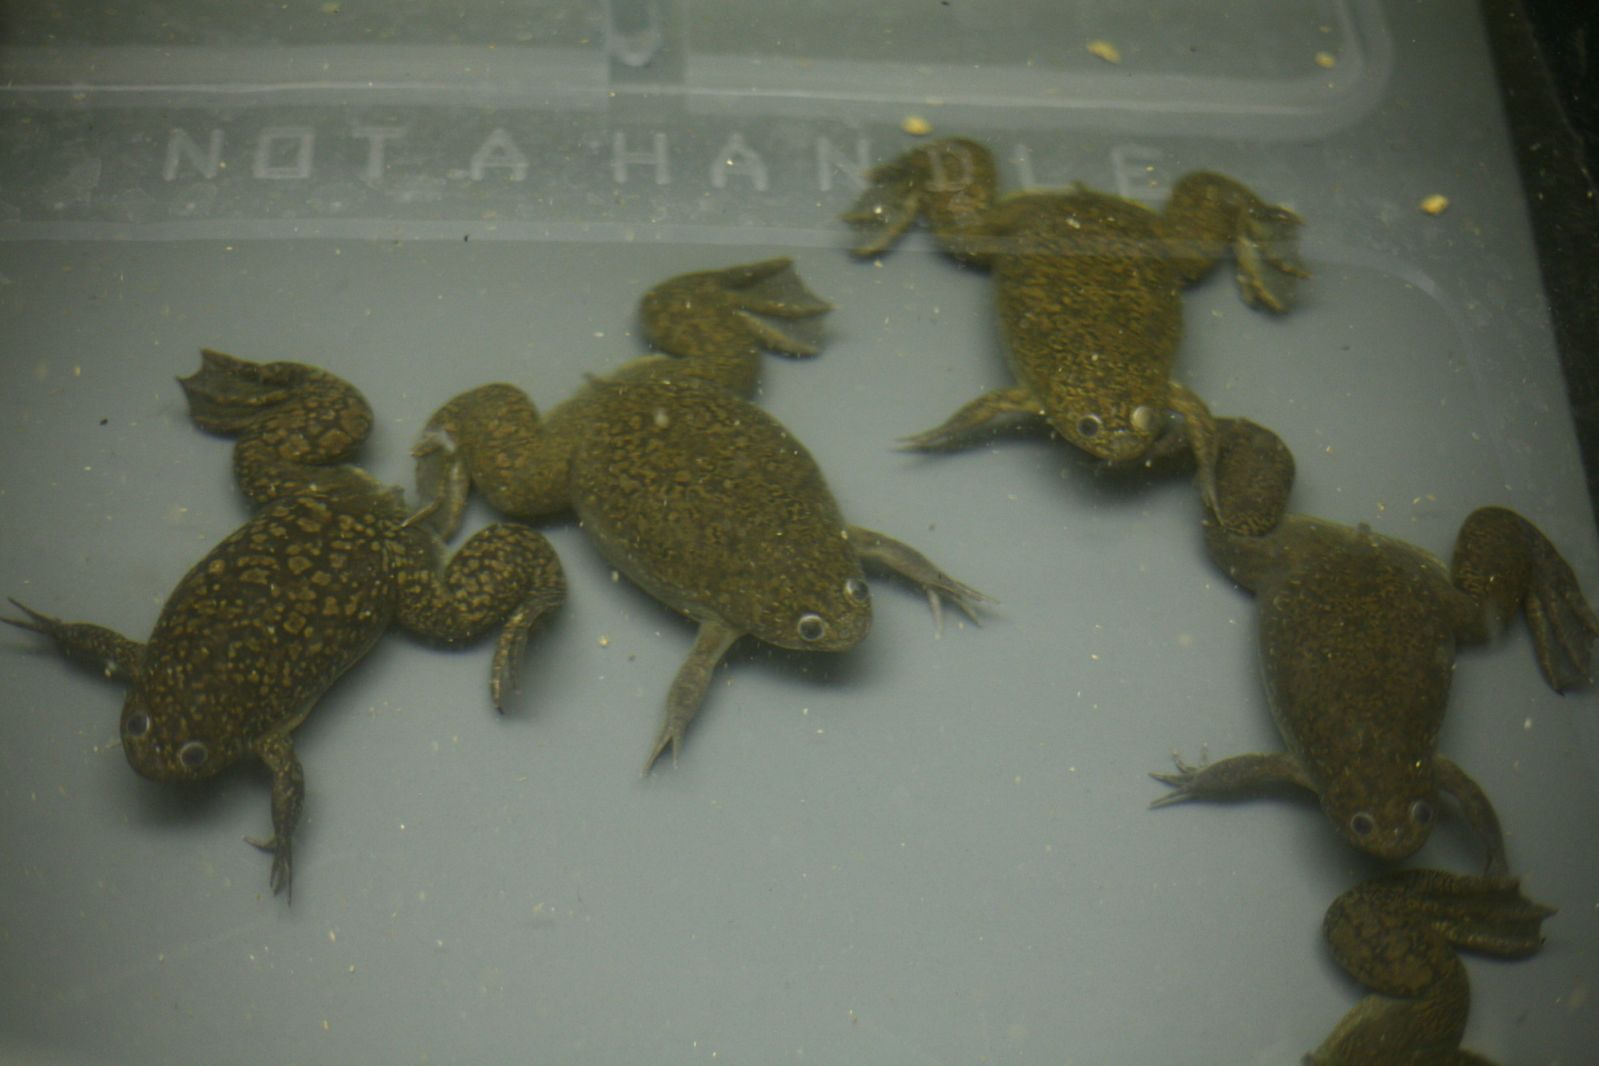 Xenopus frogs